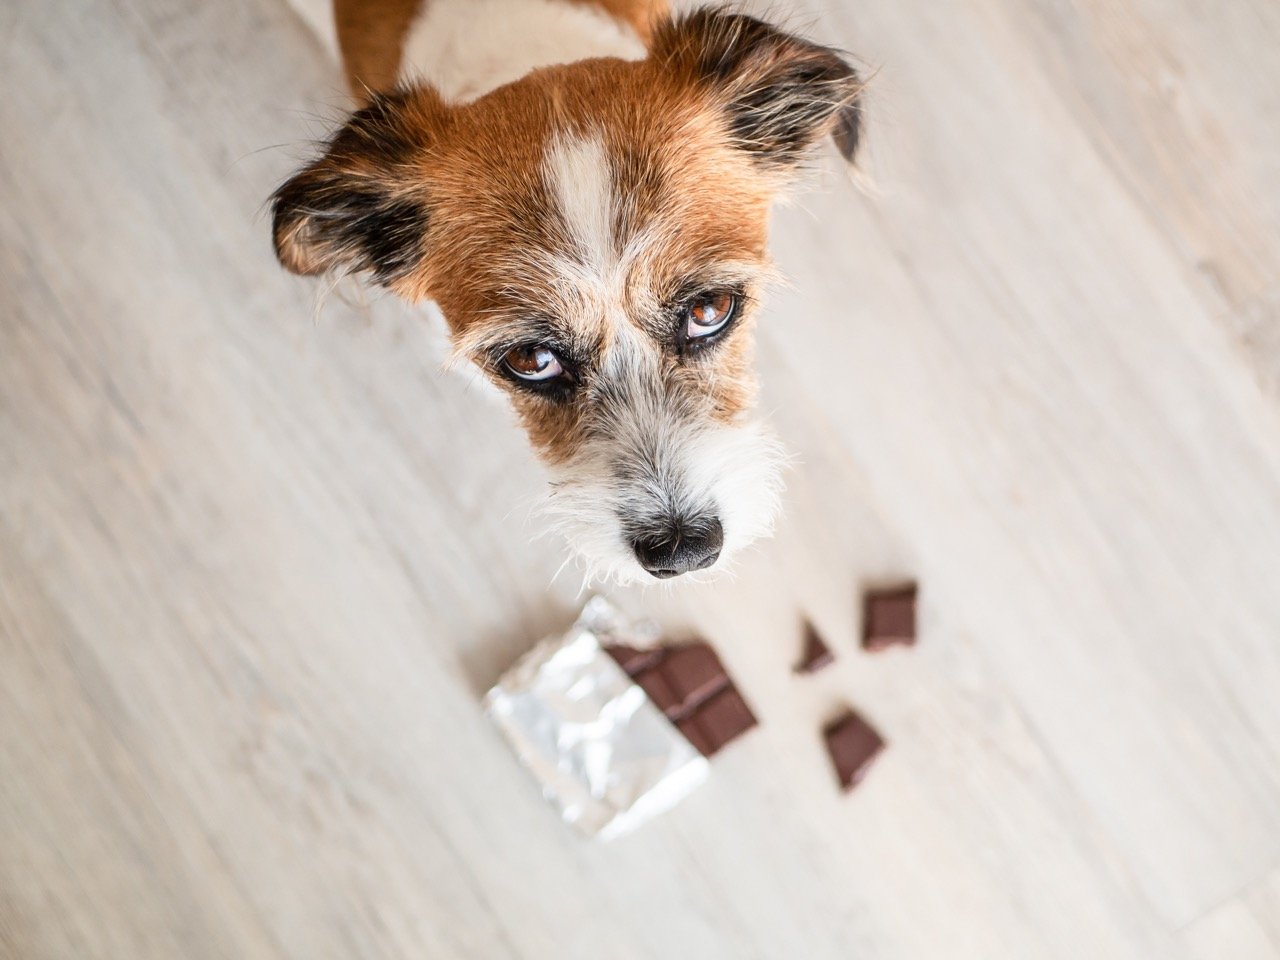 How to Prevent Your Dog From Eating Chocolate